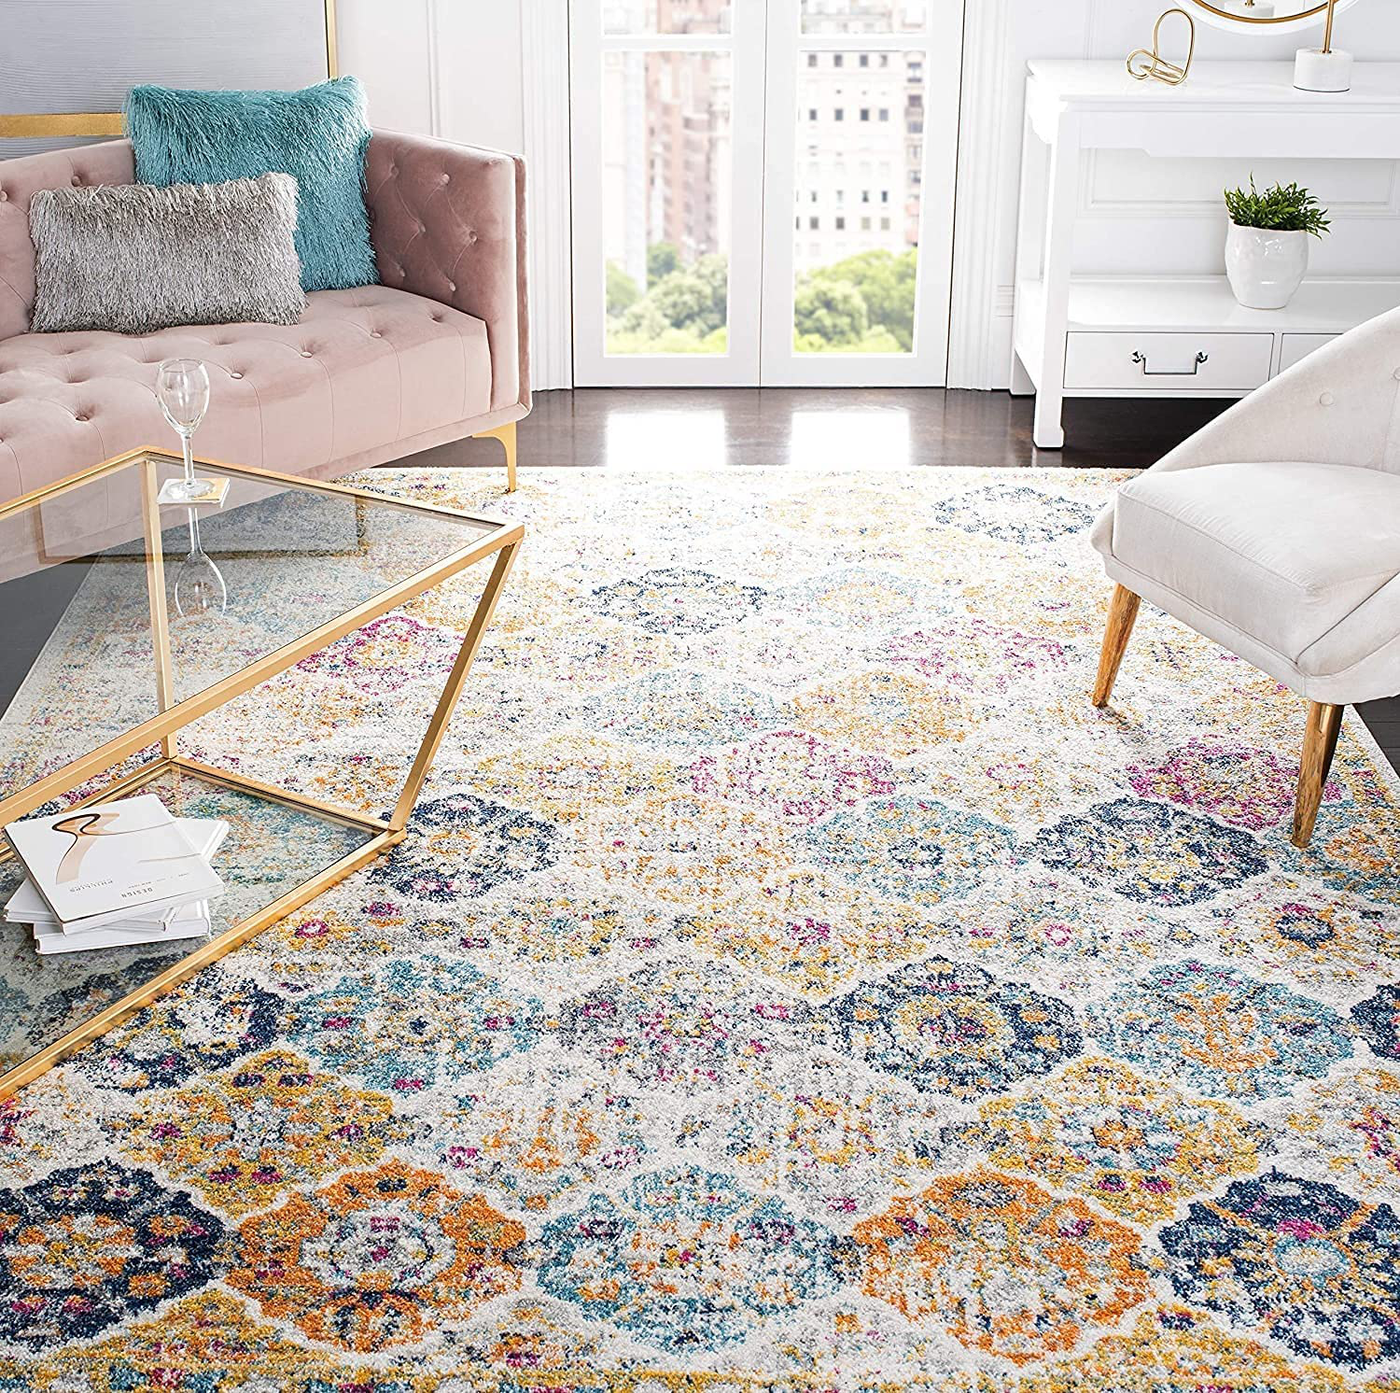 Safavieh Madison Collection MAD611B Boho Chic Floral Medallion Trellis Distressed Non-Shedding Stain Resistant Living Room Bedroom Area Rug, 3' x 5', Cream / Multi